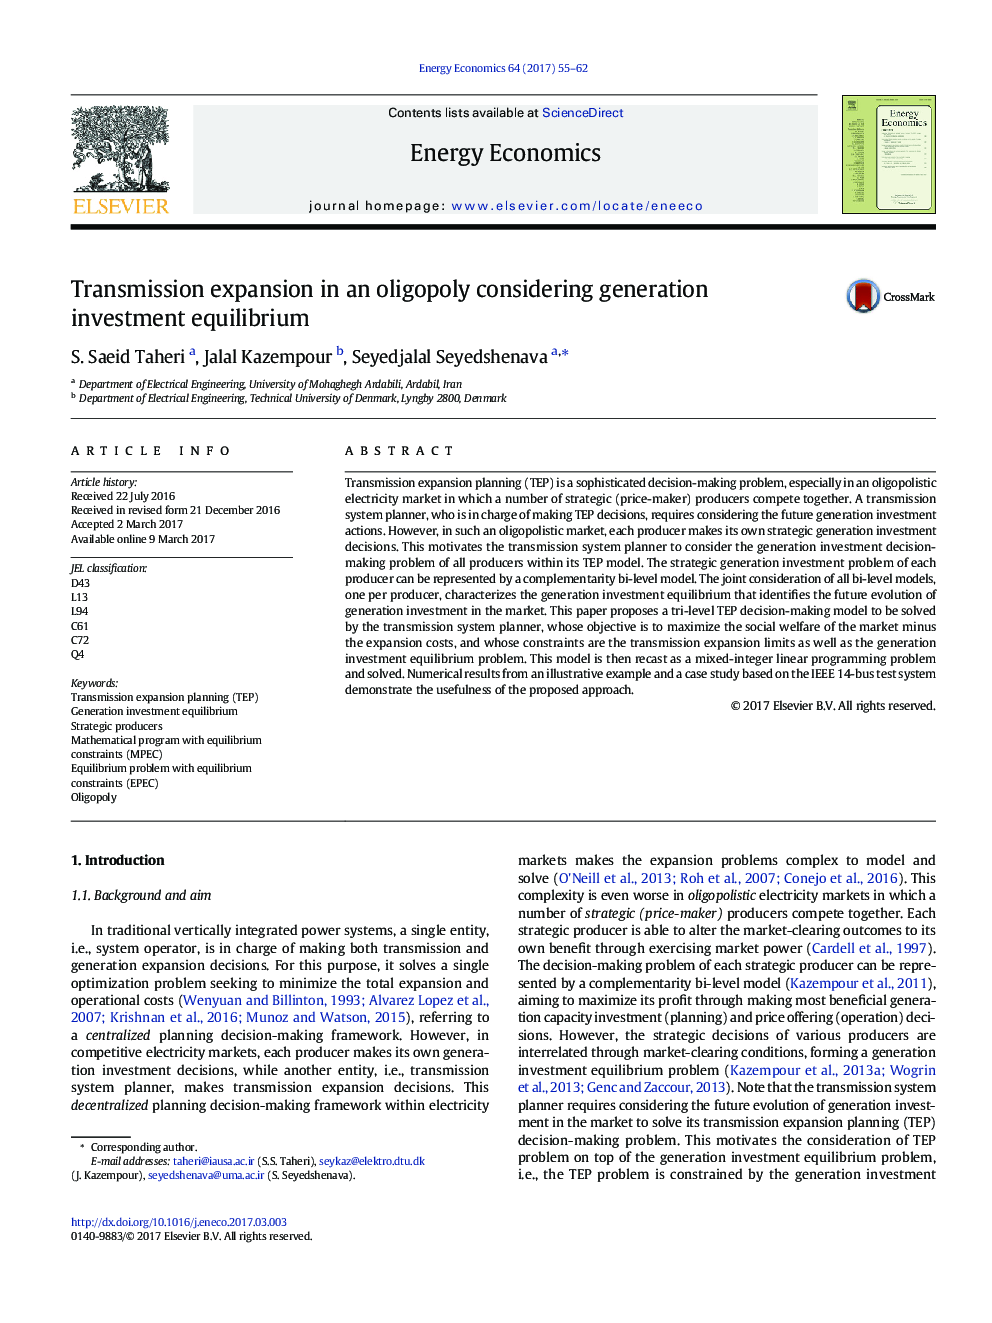 Transmission expansion in an oligopoly considering generation investment equilibrium